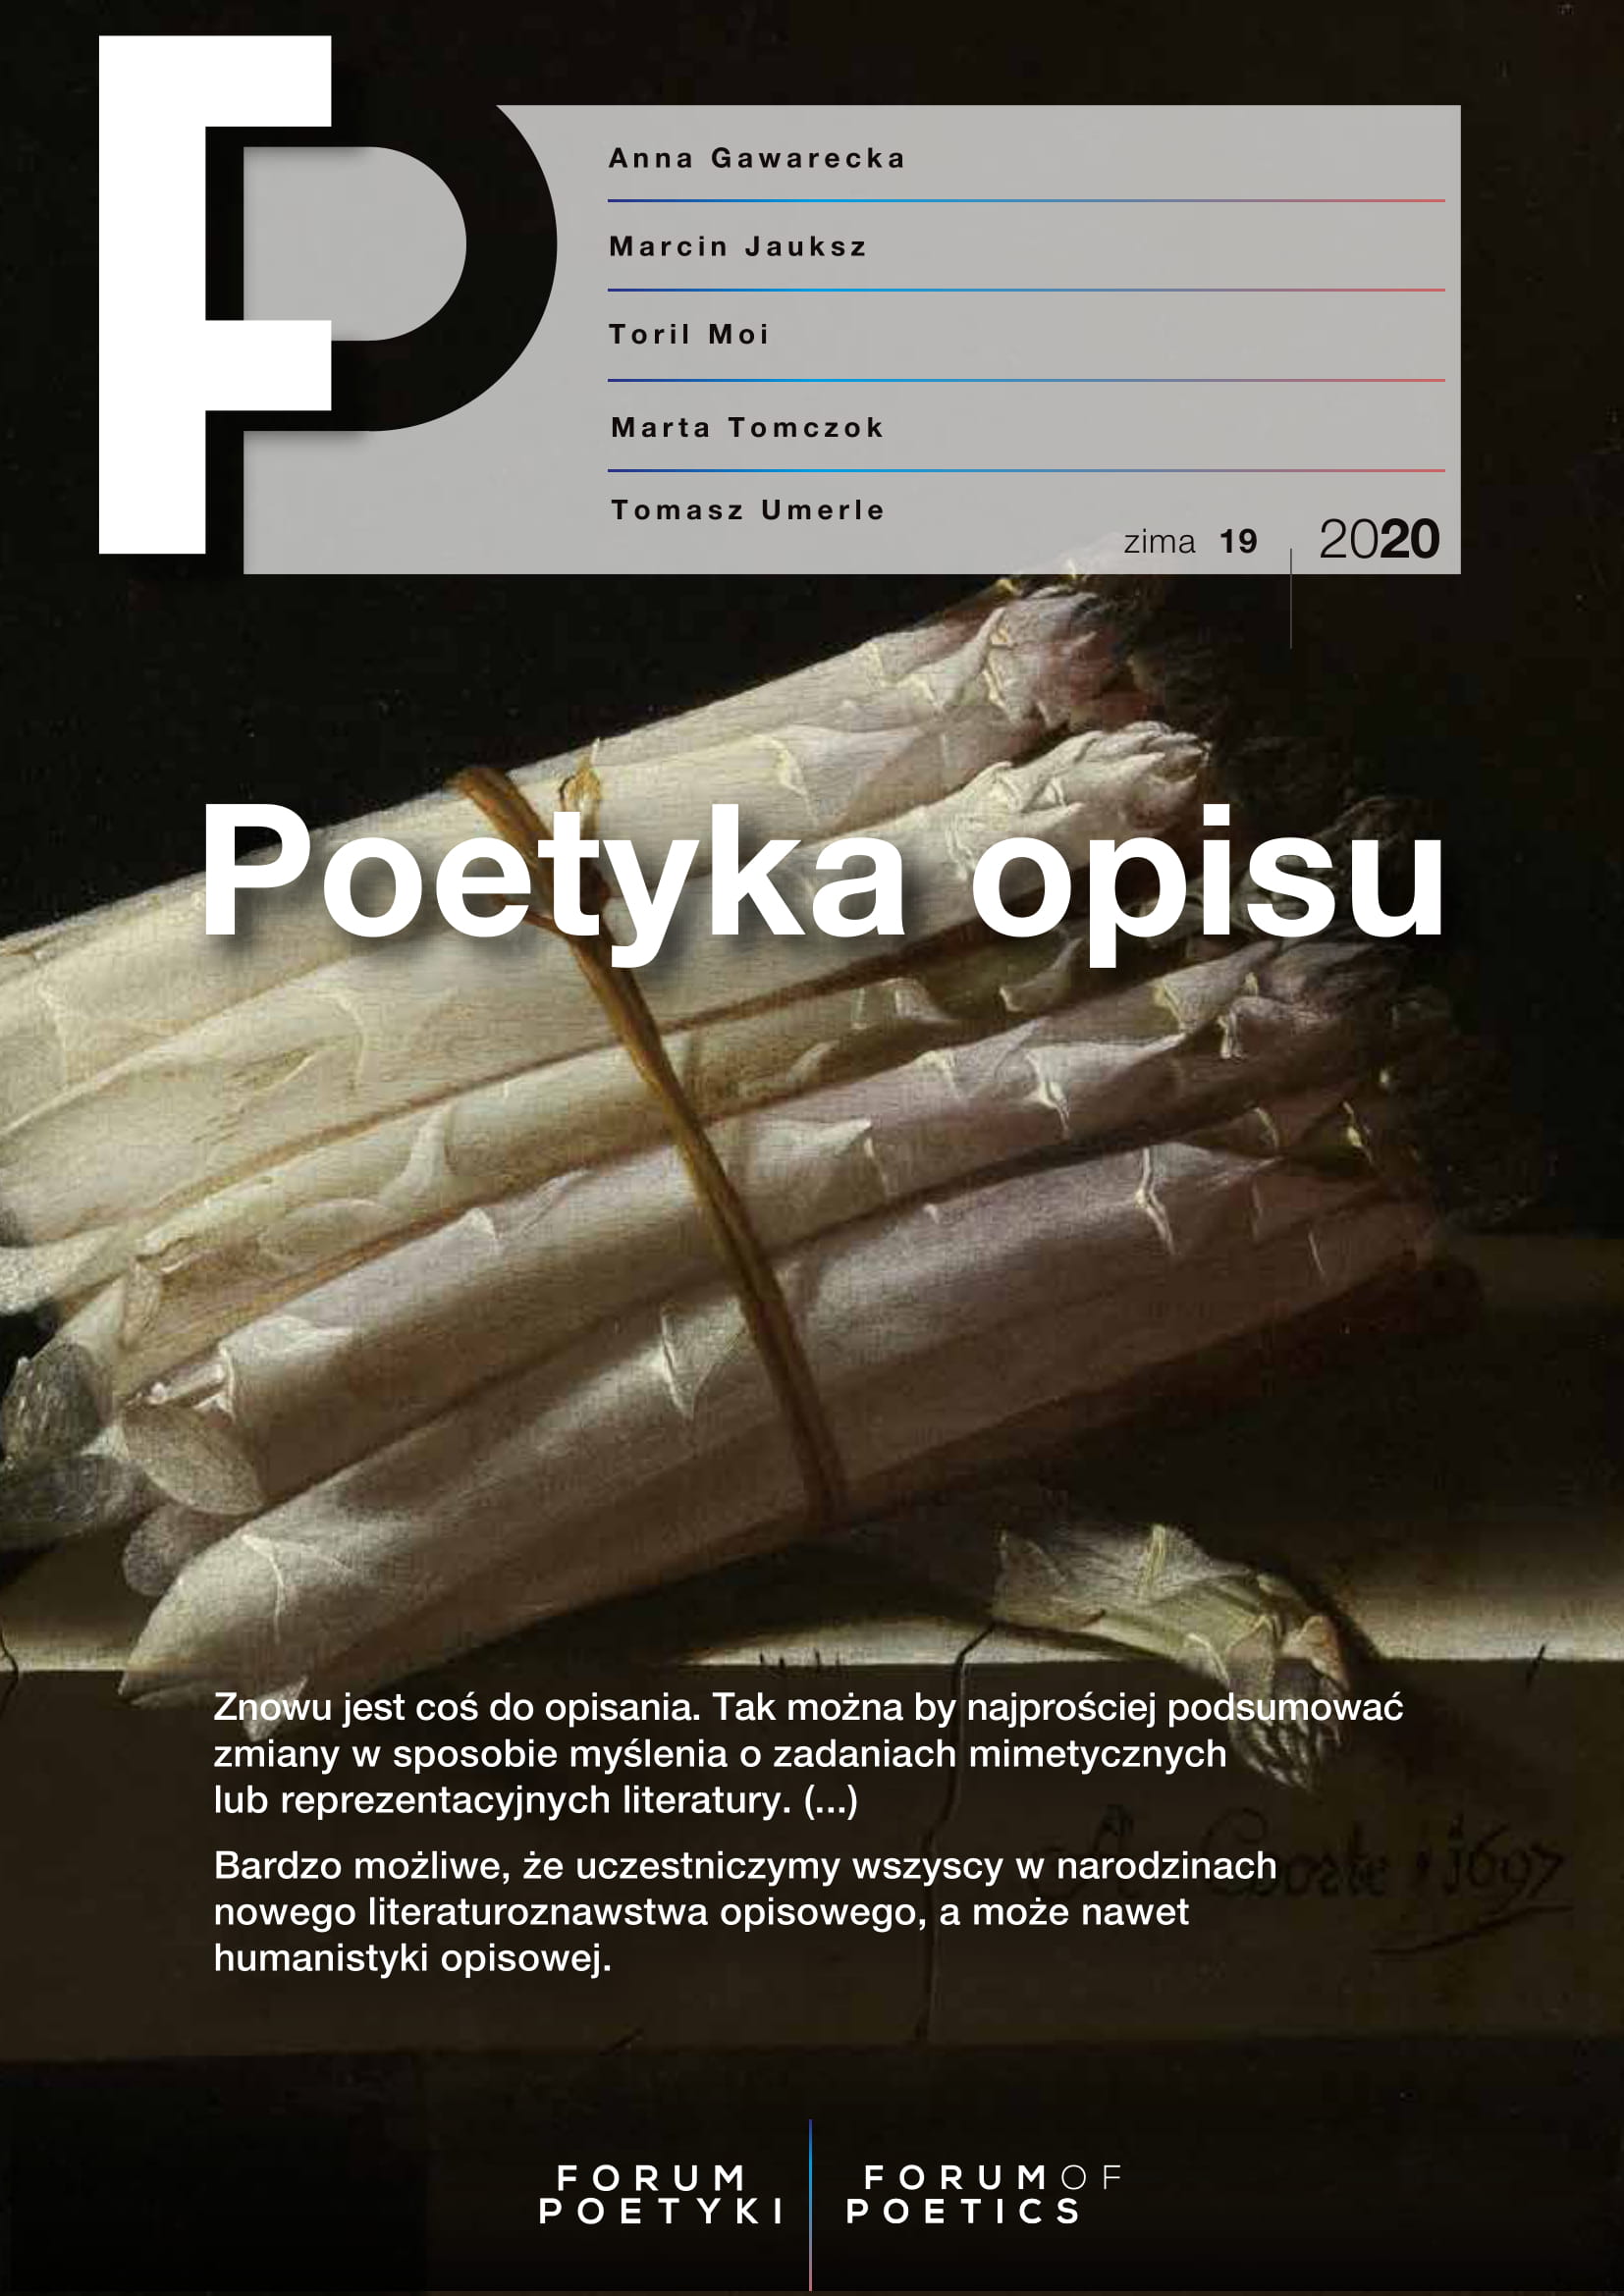 Shadows of Everyday Life. The Poetics of the Description in The Doll in the Light of Notes on the Composition of Bolesław Prus Cover Image